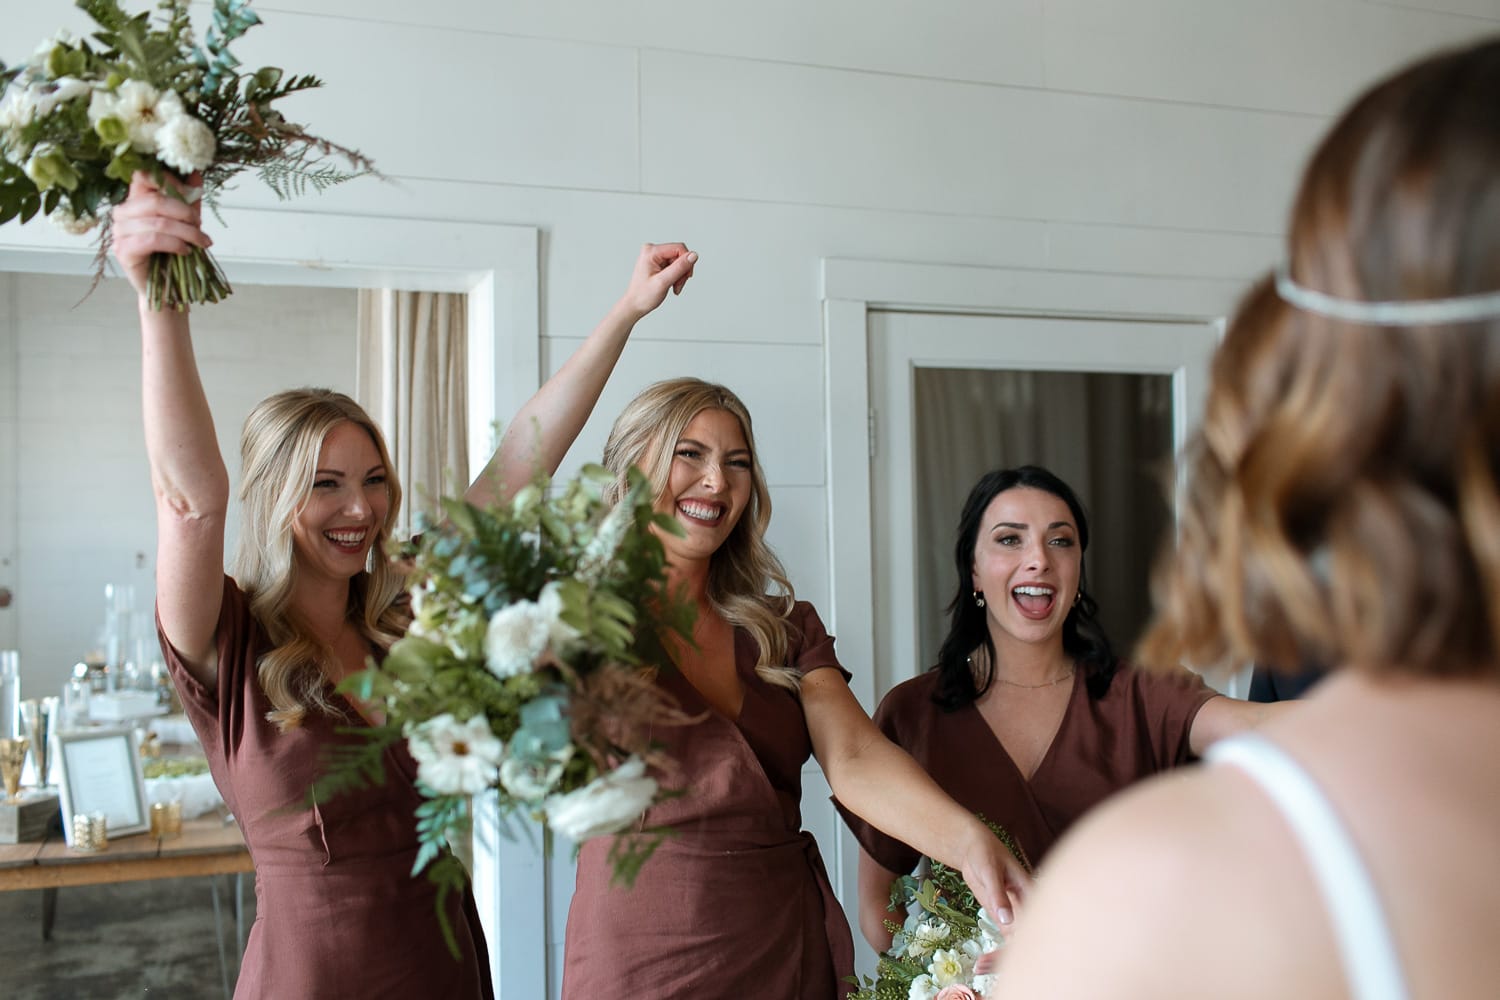 Bridesmaids cheering on the bride. They are holding white and greenery wedding bouquets.